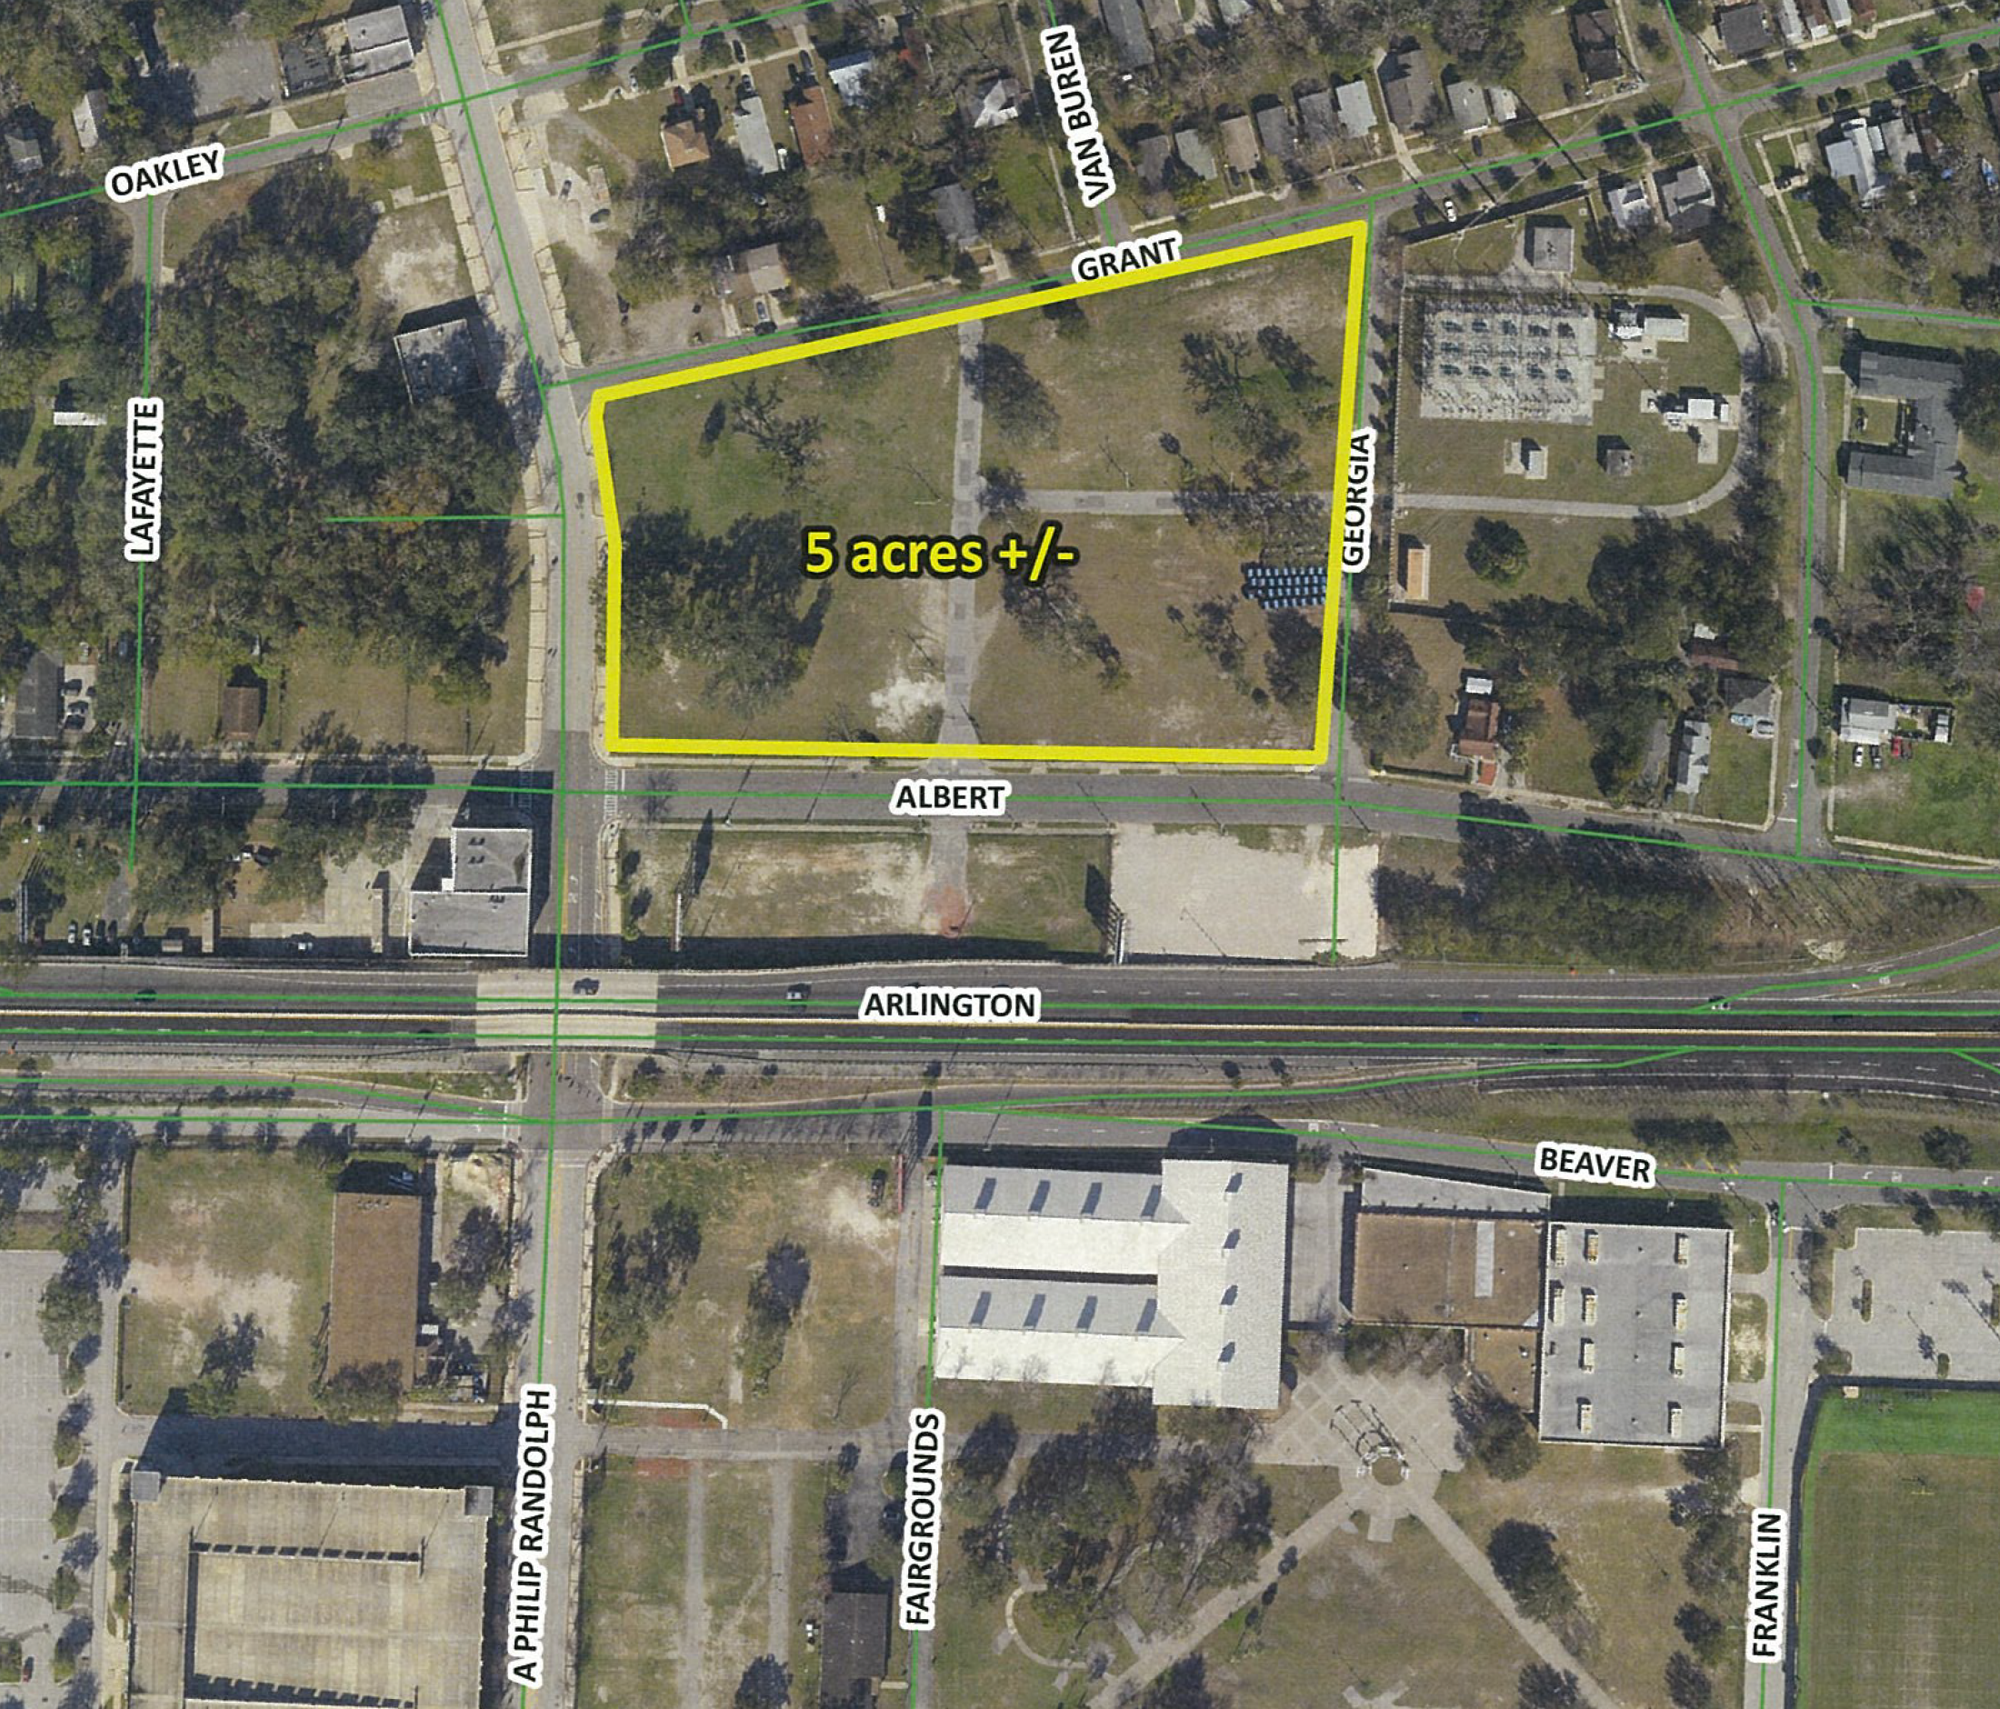 The soccer stadium site is north of the Jacksonville Fairgrounds.  Its size has been increased to 5.83 acres.